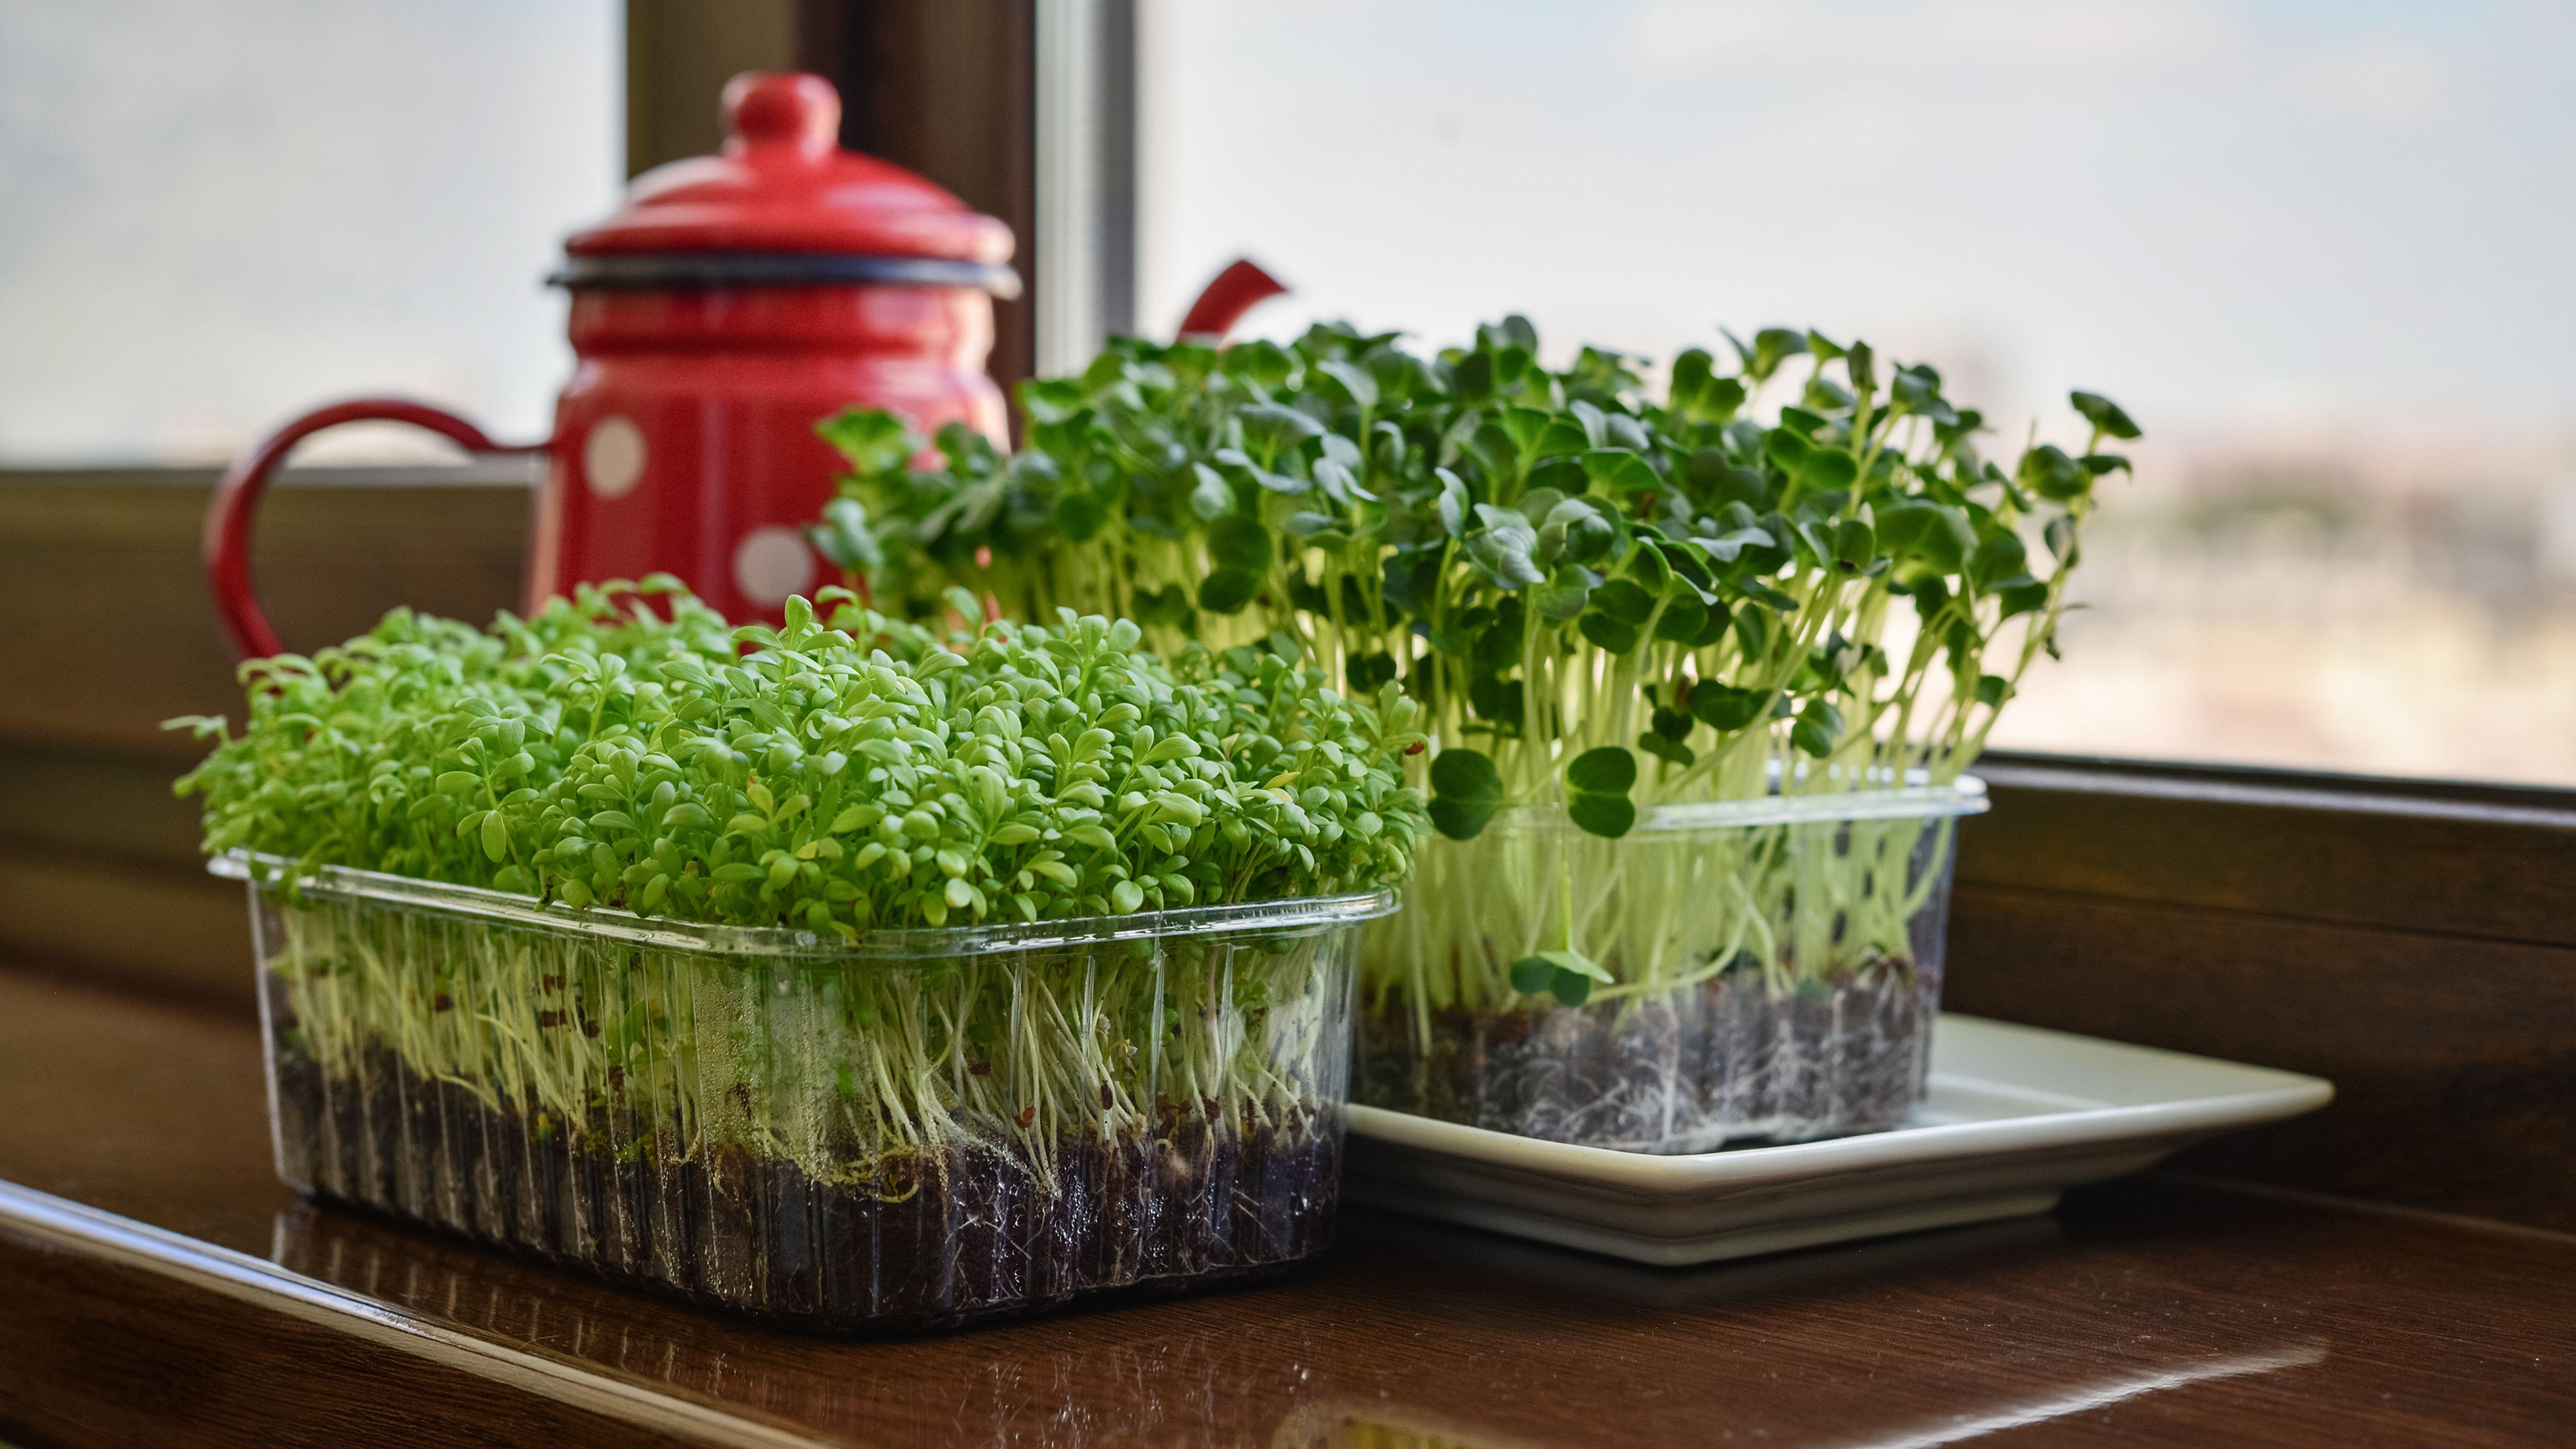 How to grow cress in soil